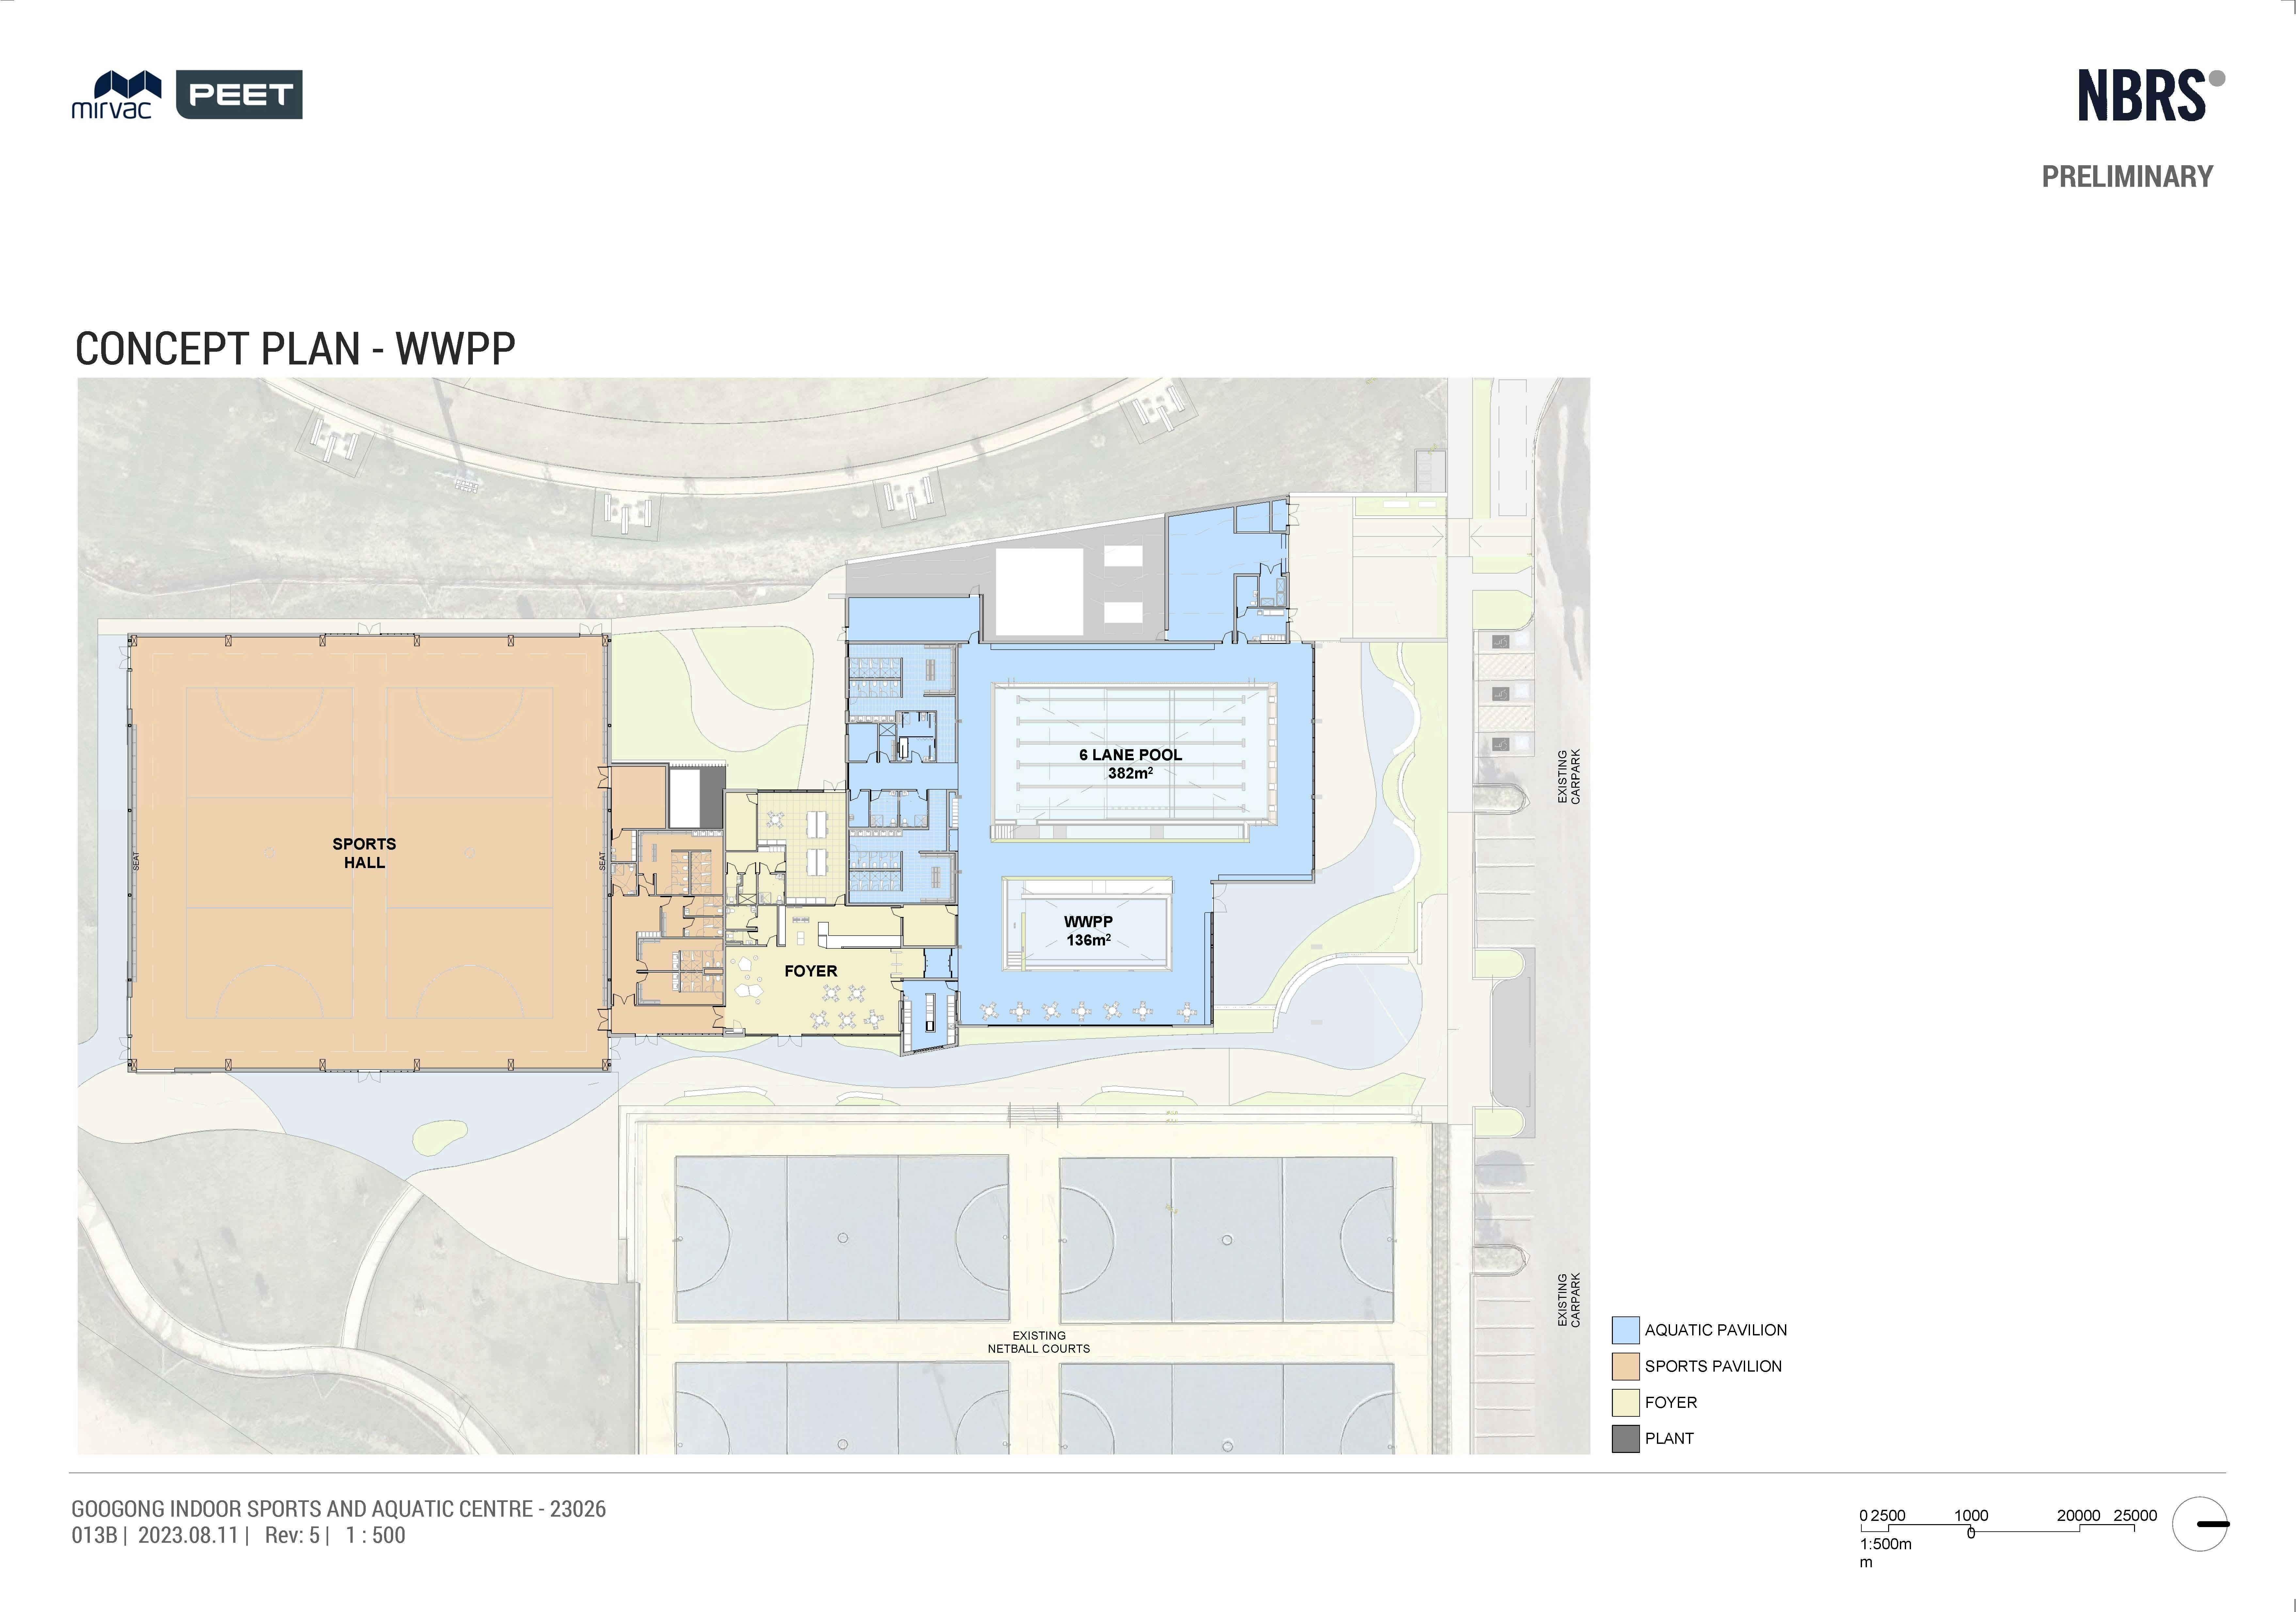 Proposed new scope - Googong Indoor Sports and Aquatic Centre - Amended LPA